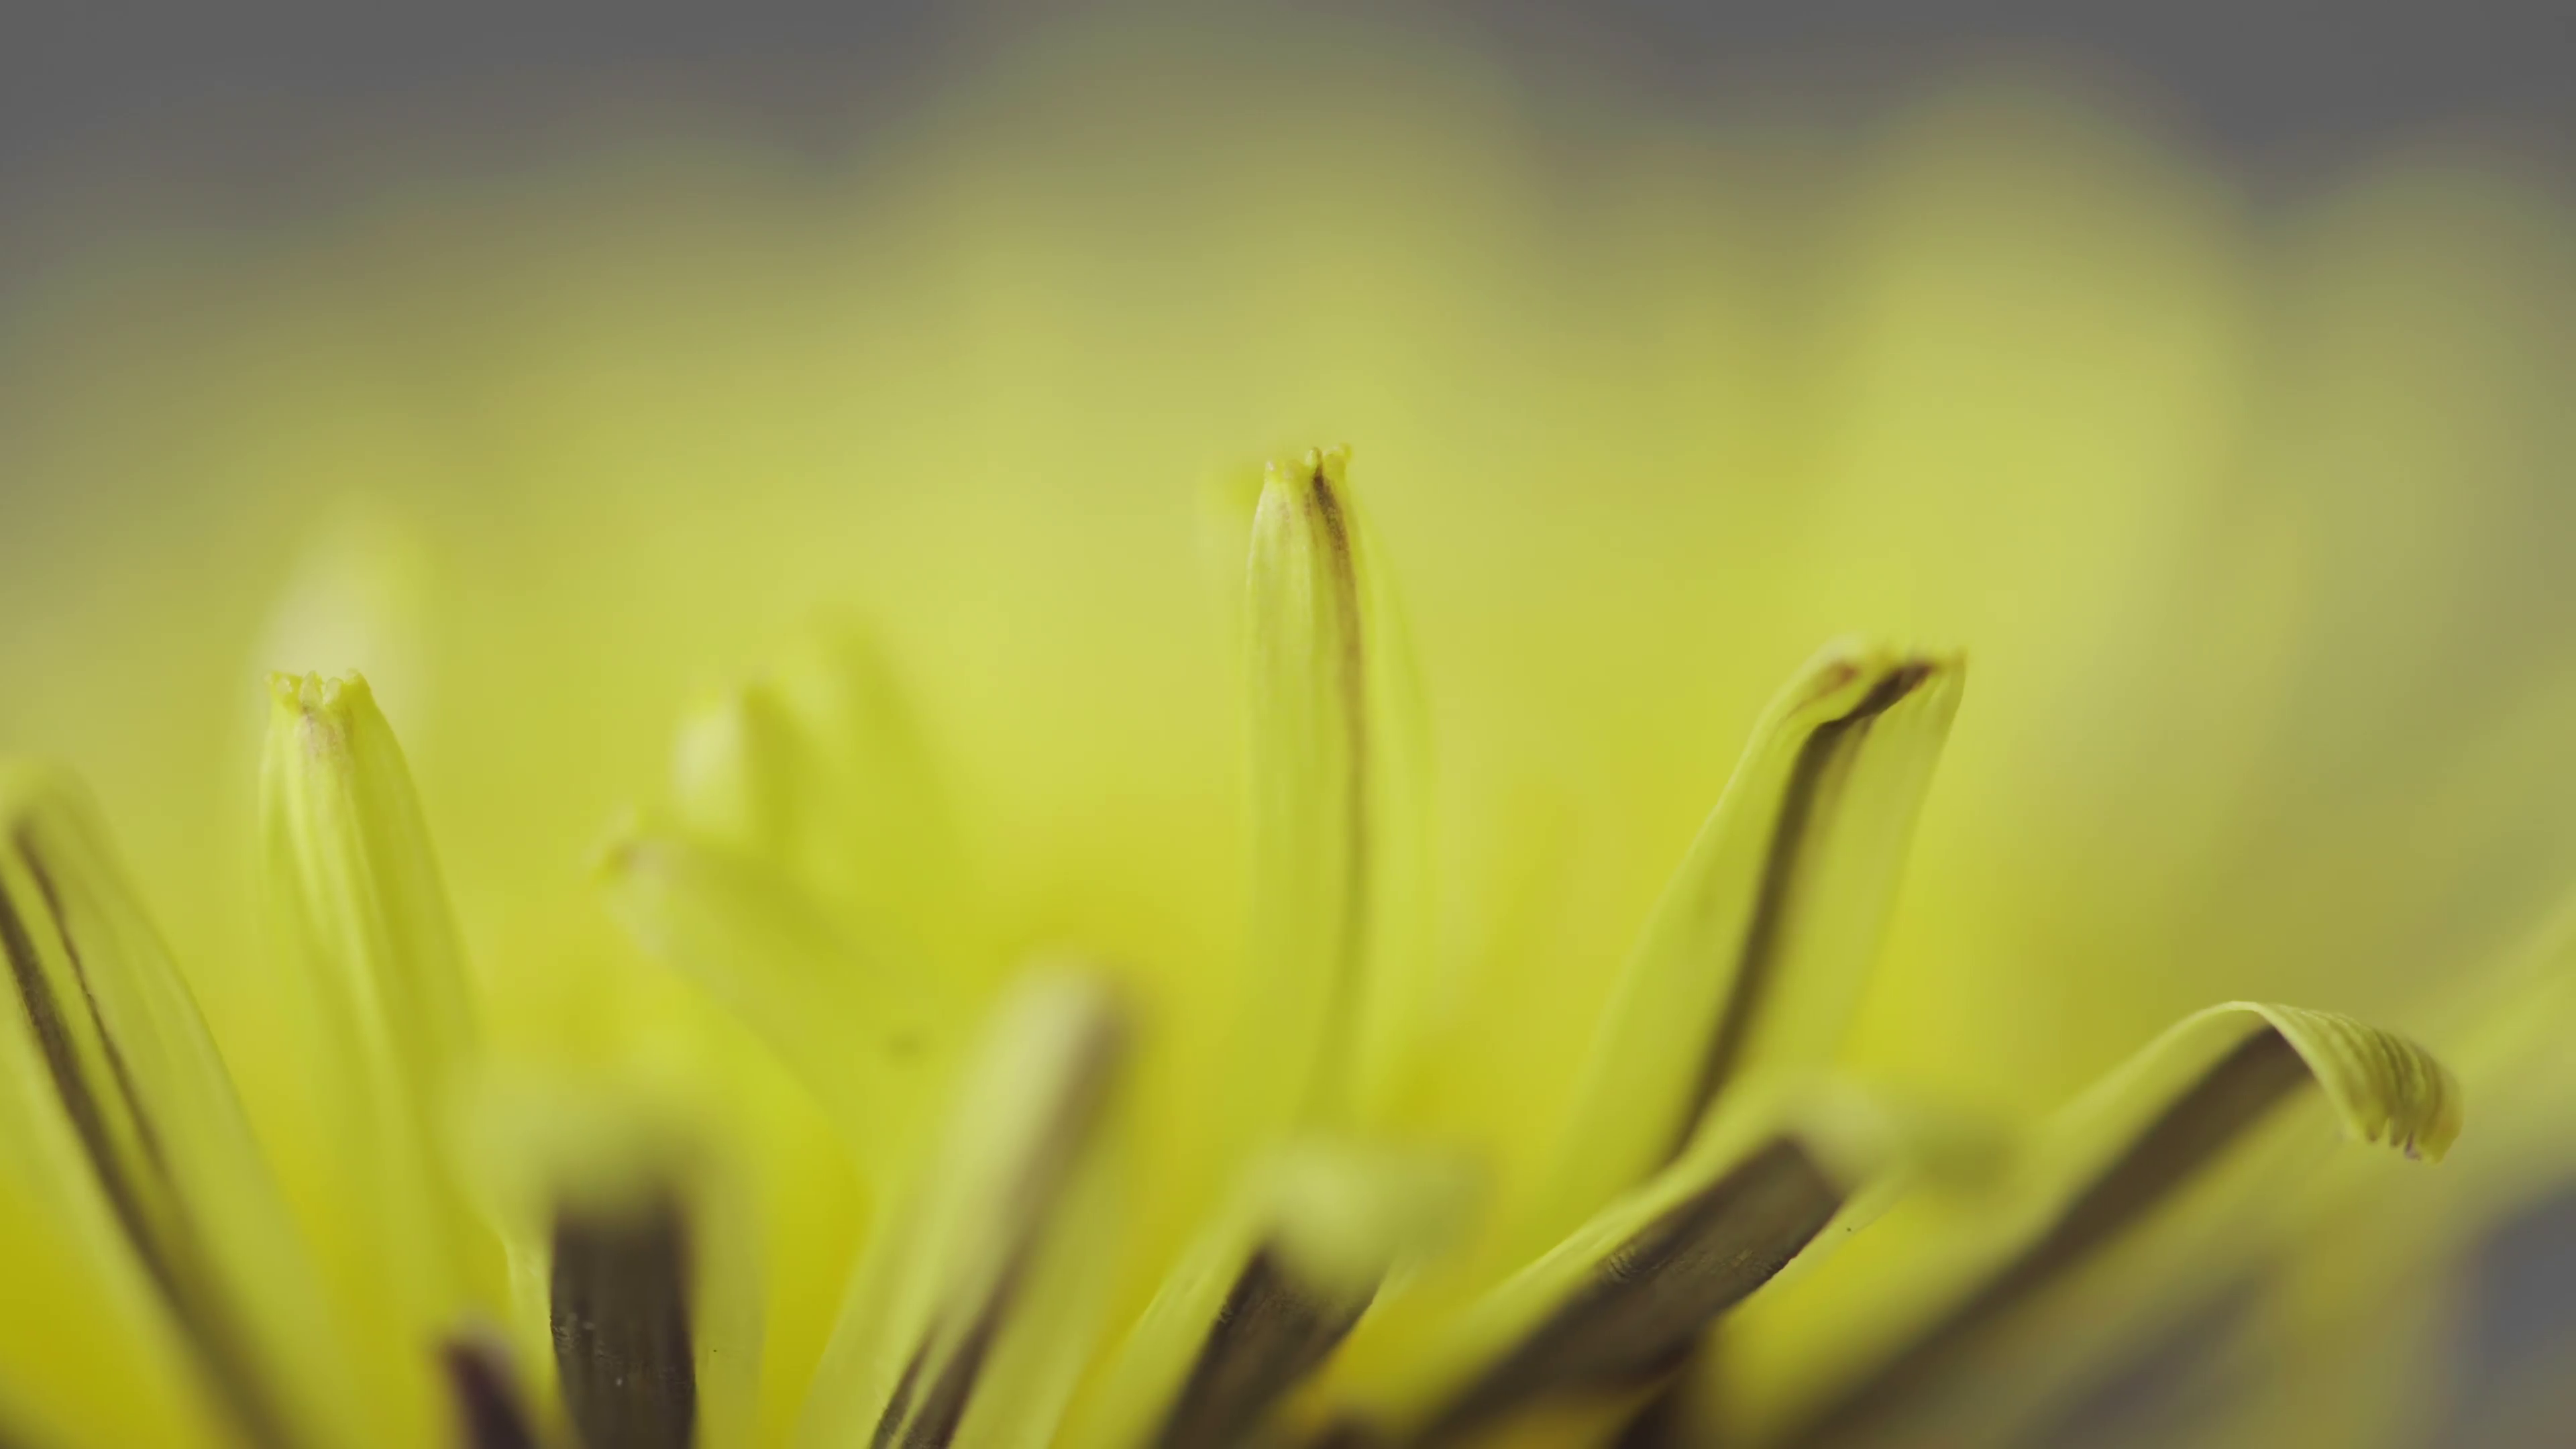 Dandelion flower in extreme close up UHD stock footage. A wild ...